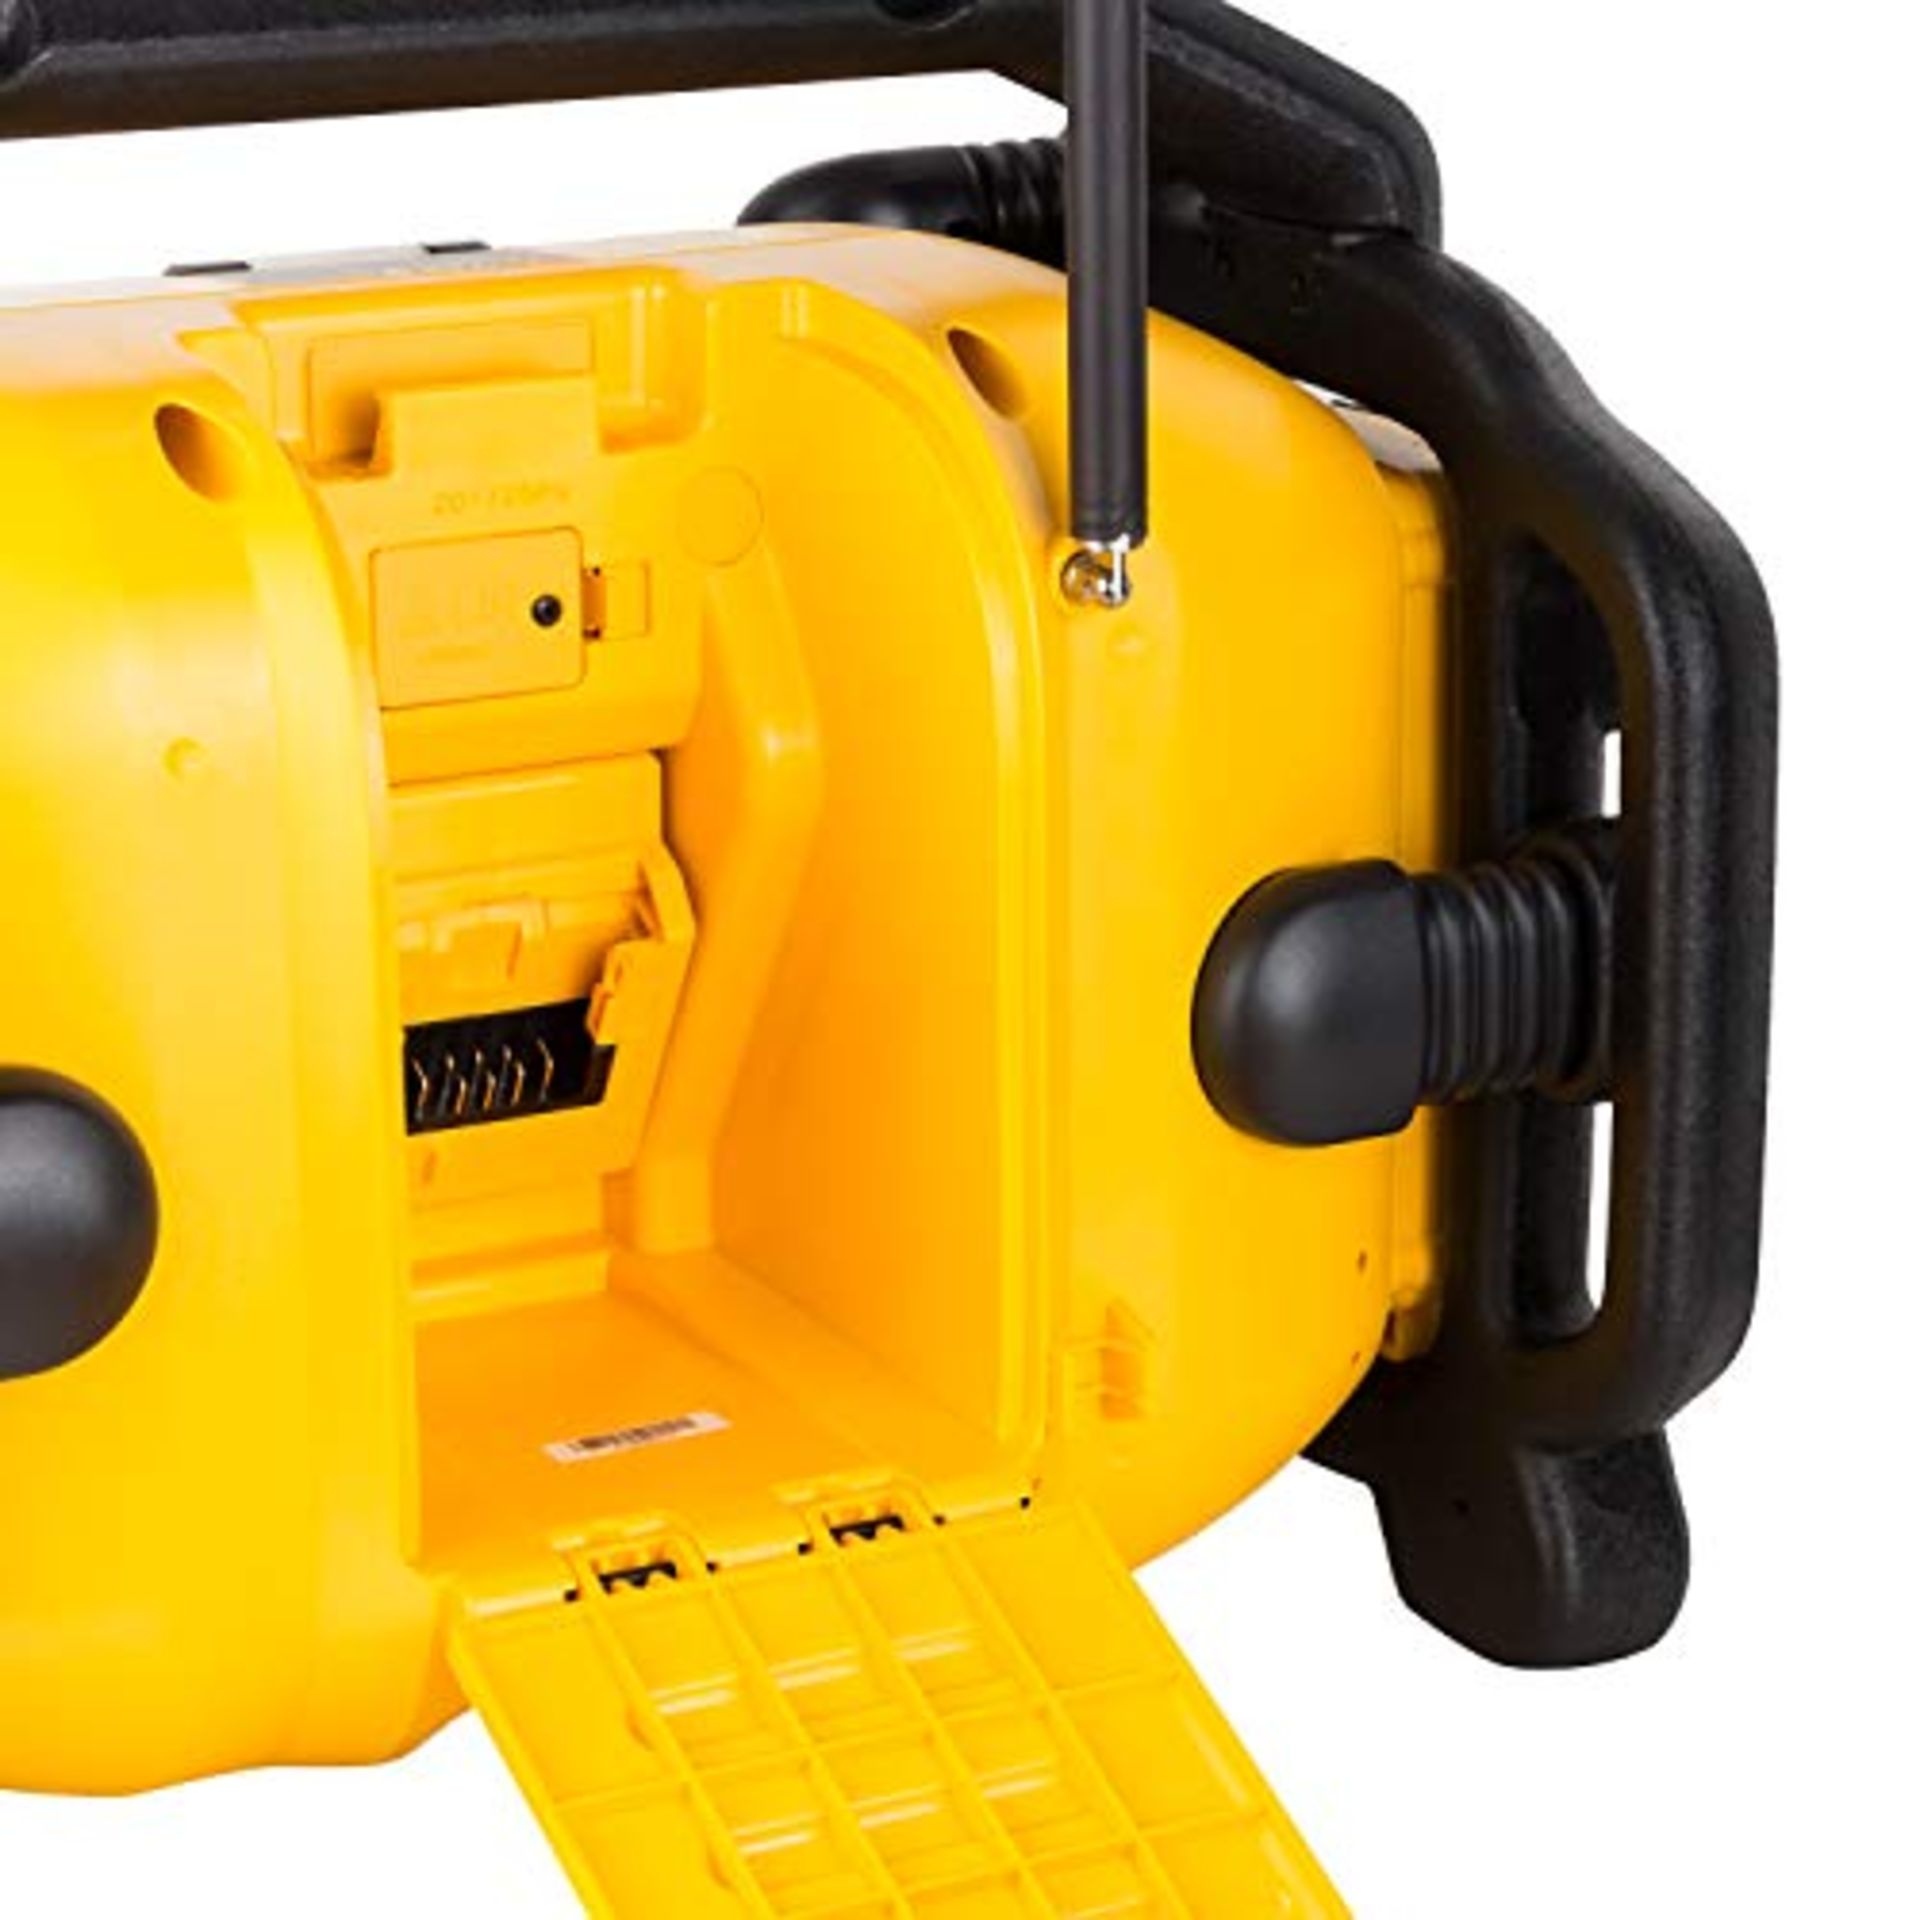 1 x Dewalt DCR017-QW DCR017 Site Radio with Charger Function XR-Li-Ion Battery or Mains Operated, 23 - Image 3 of 7